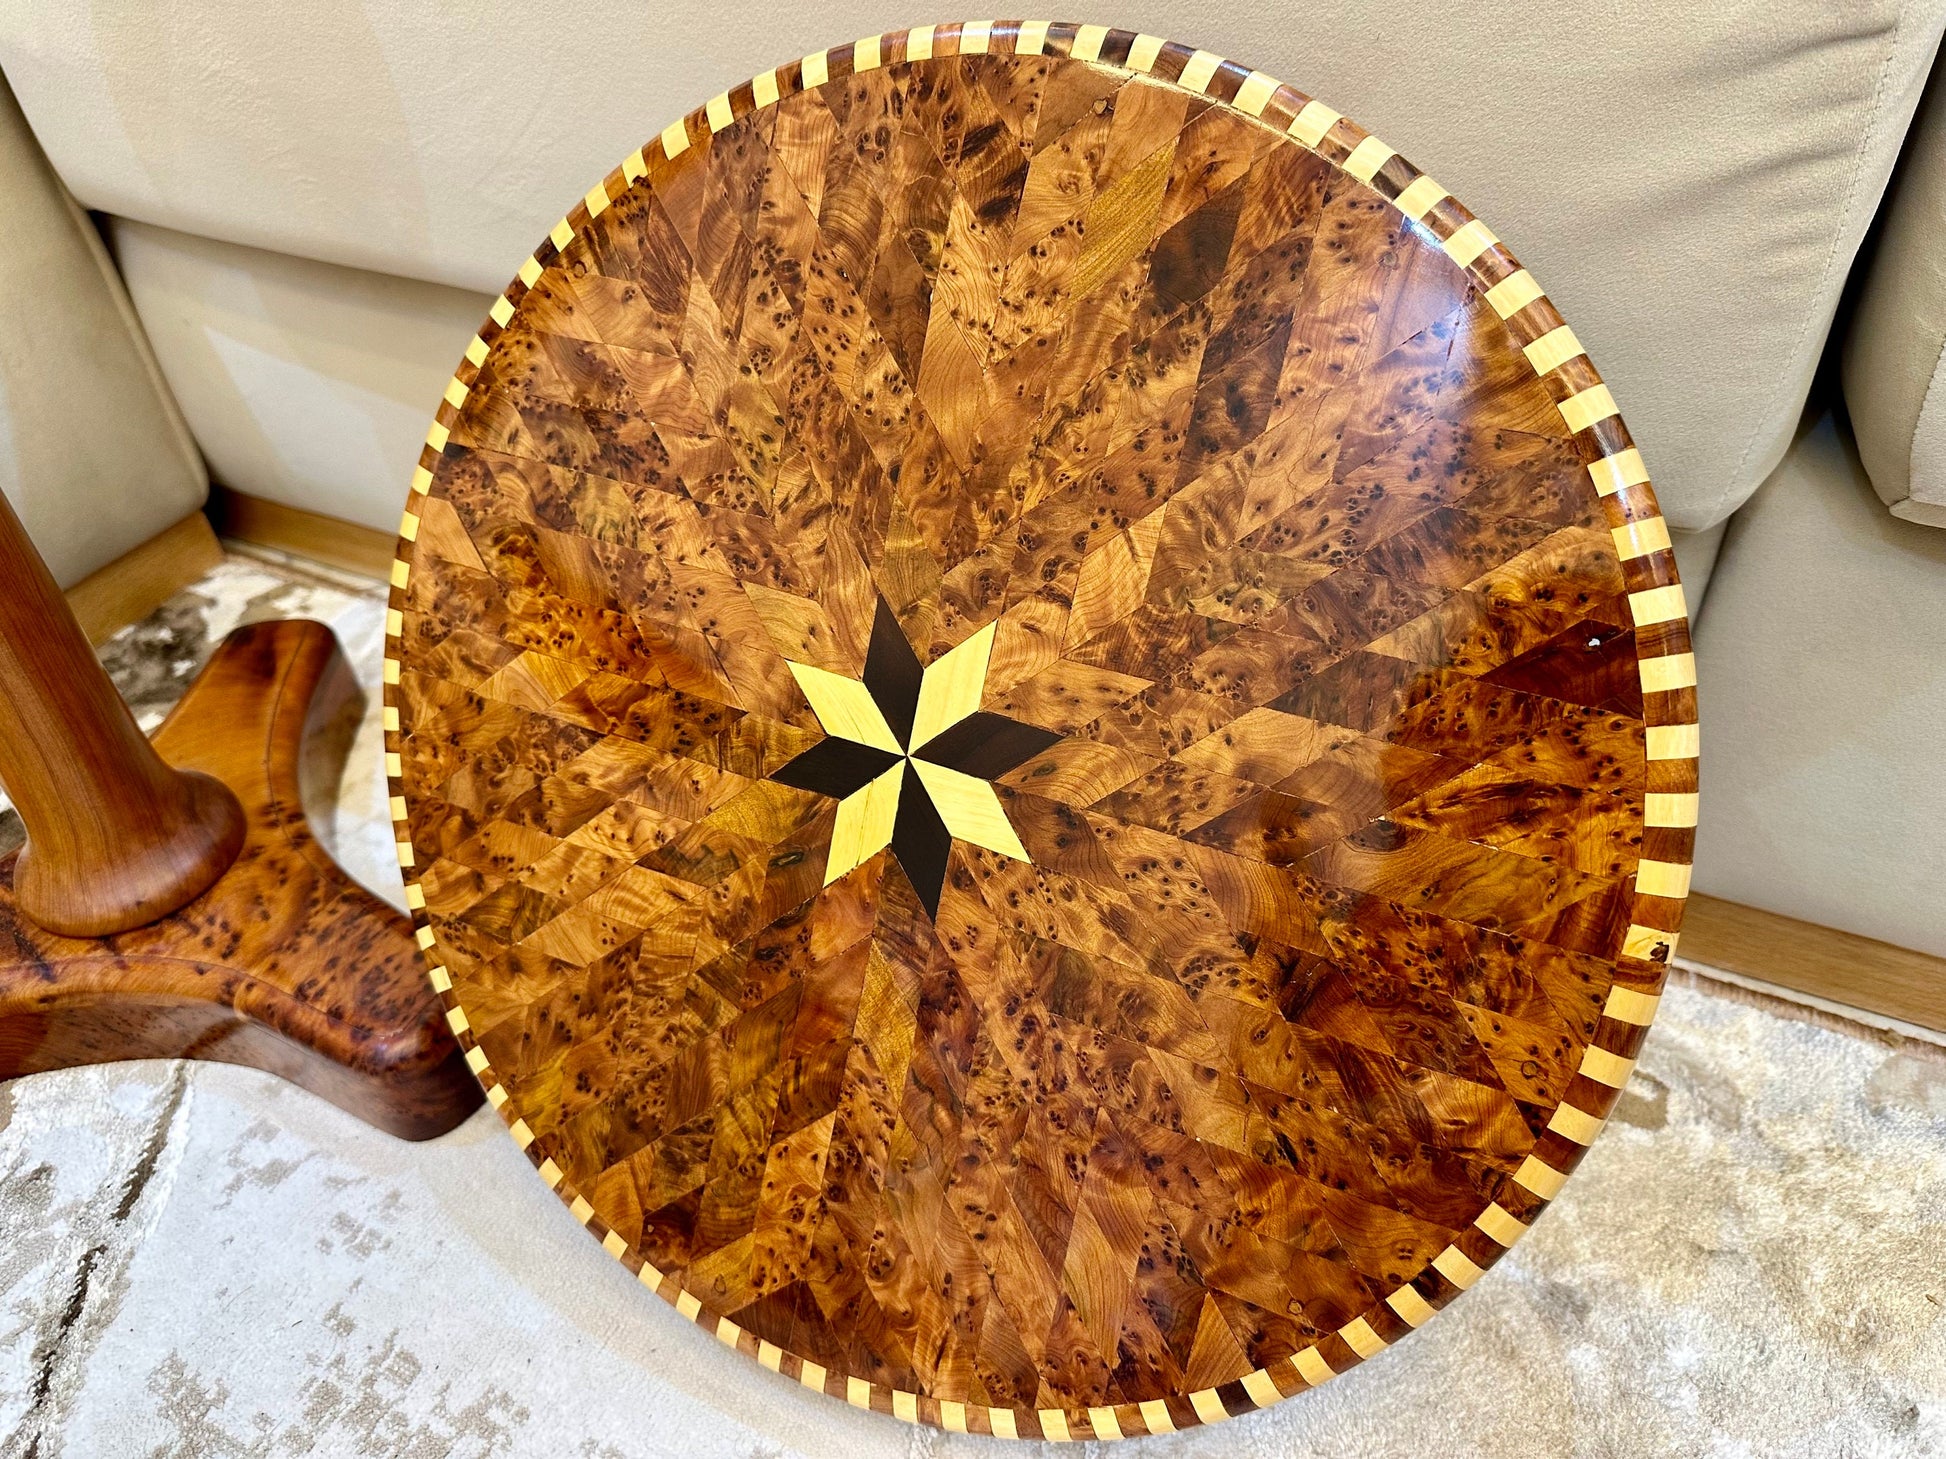 Handmade Moroccan coffee table,mcm round Wood Table with Lemon and thuya Inlay,unique home decor living room,Berber teak side coffee table